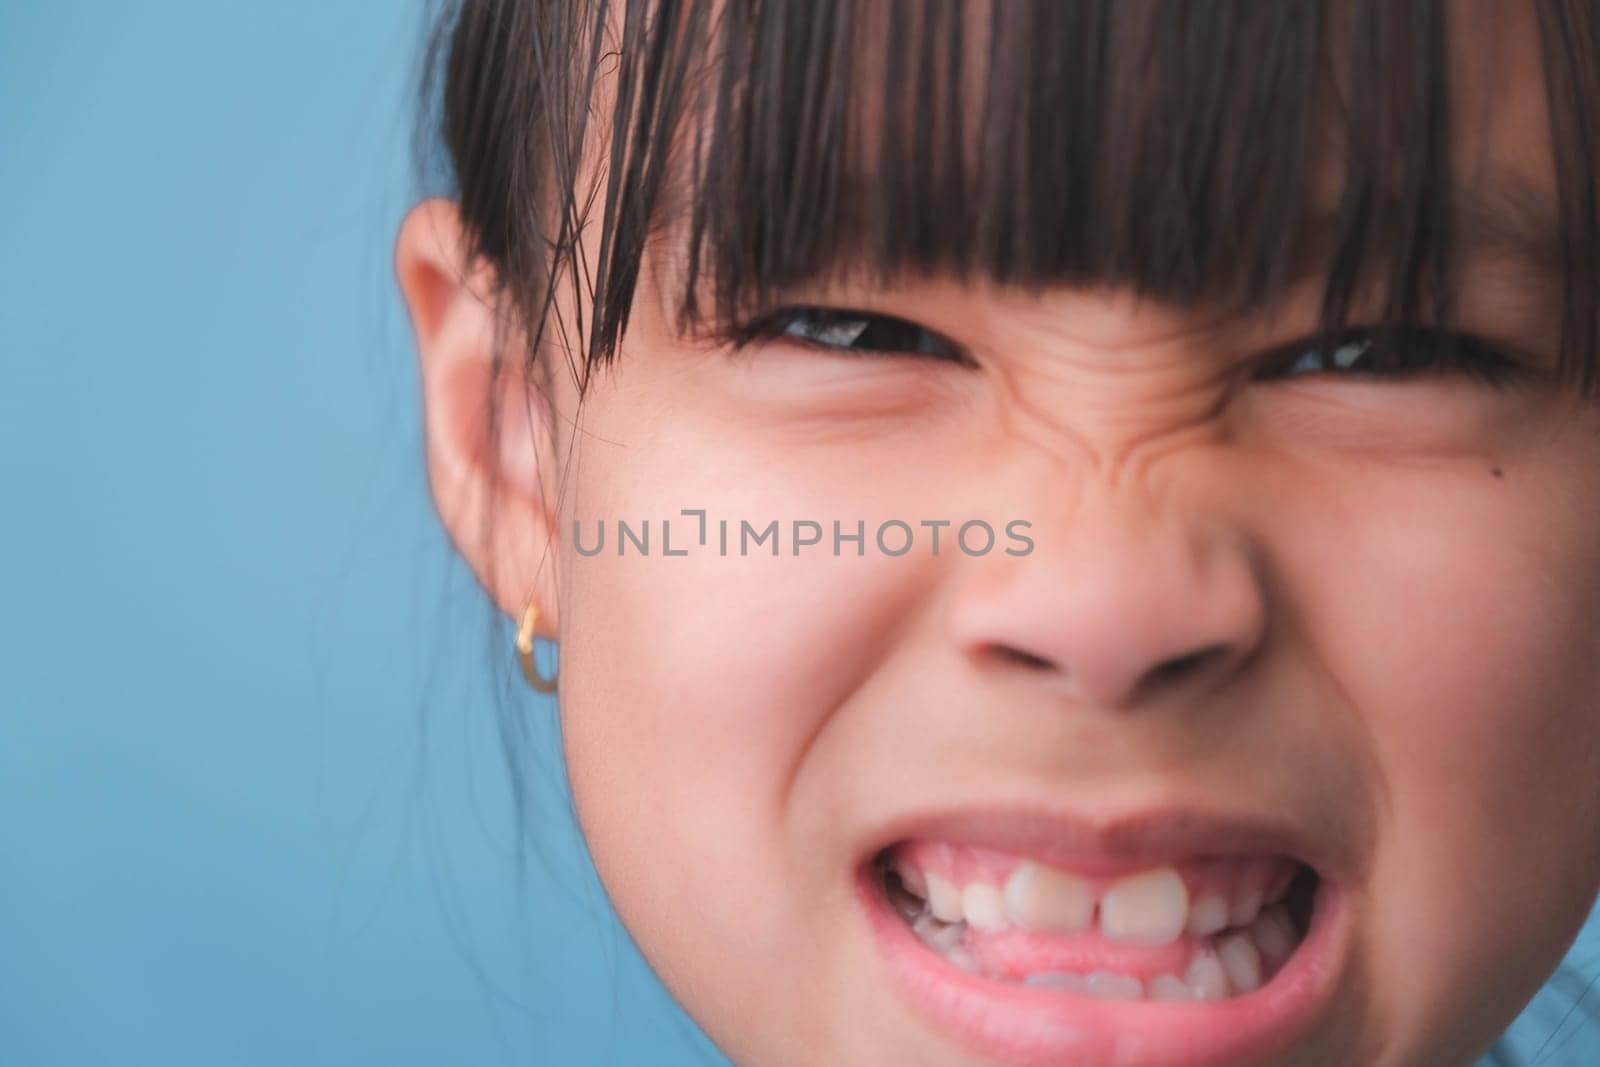 Close-up of smiling young girl revealing her beautiful white teeth on a blue background. Concept of good health in childhood. by TEERASAK